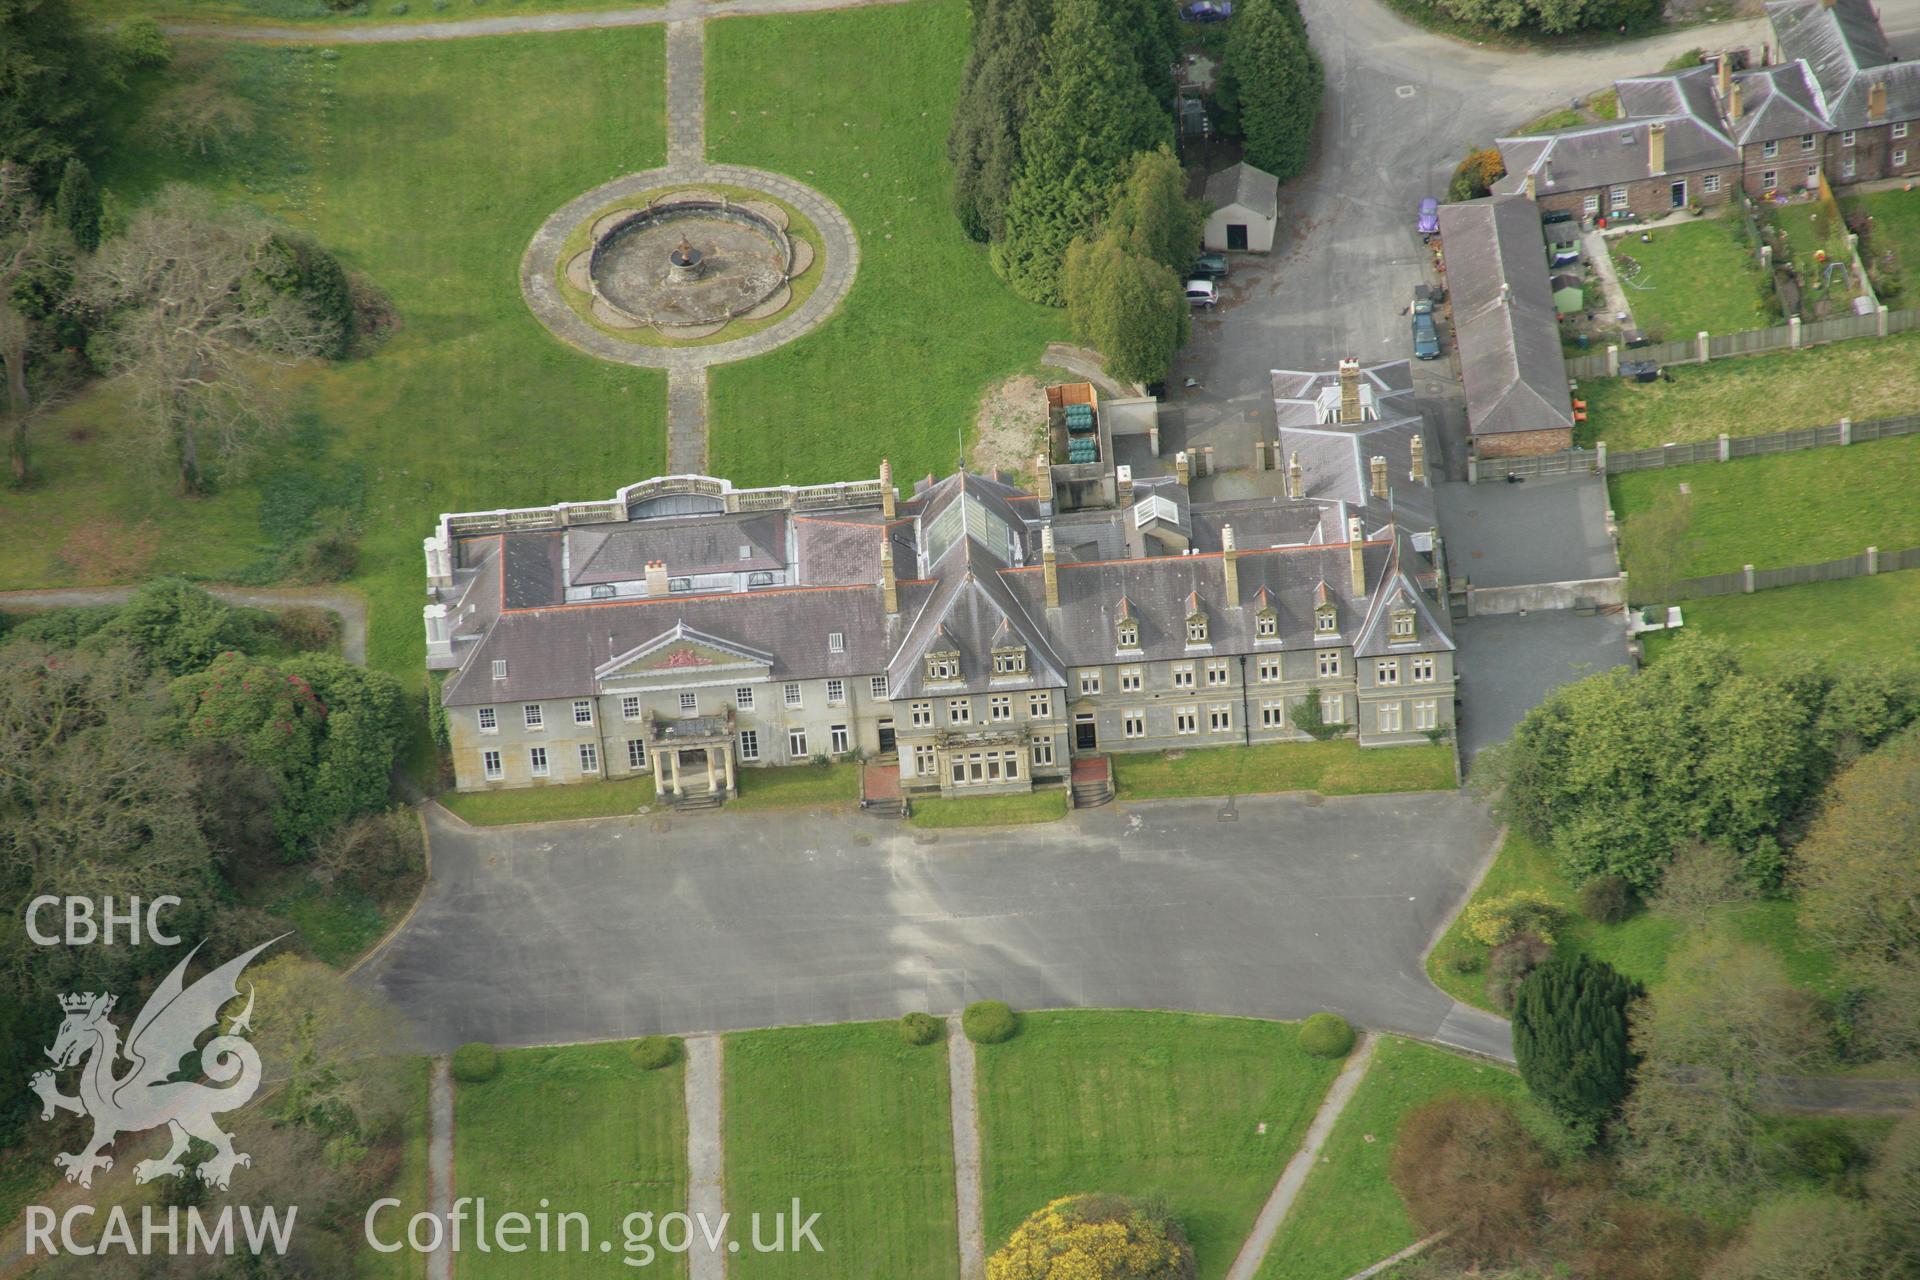 RCAHMW colour oblique aerial photograph of Trawsgoed Mansion. Taken on 17 April 2007 by Toby Driver